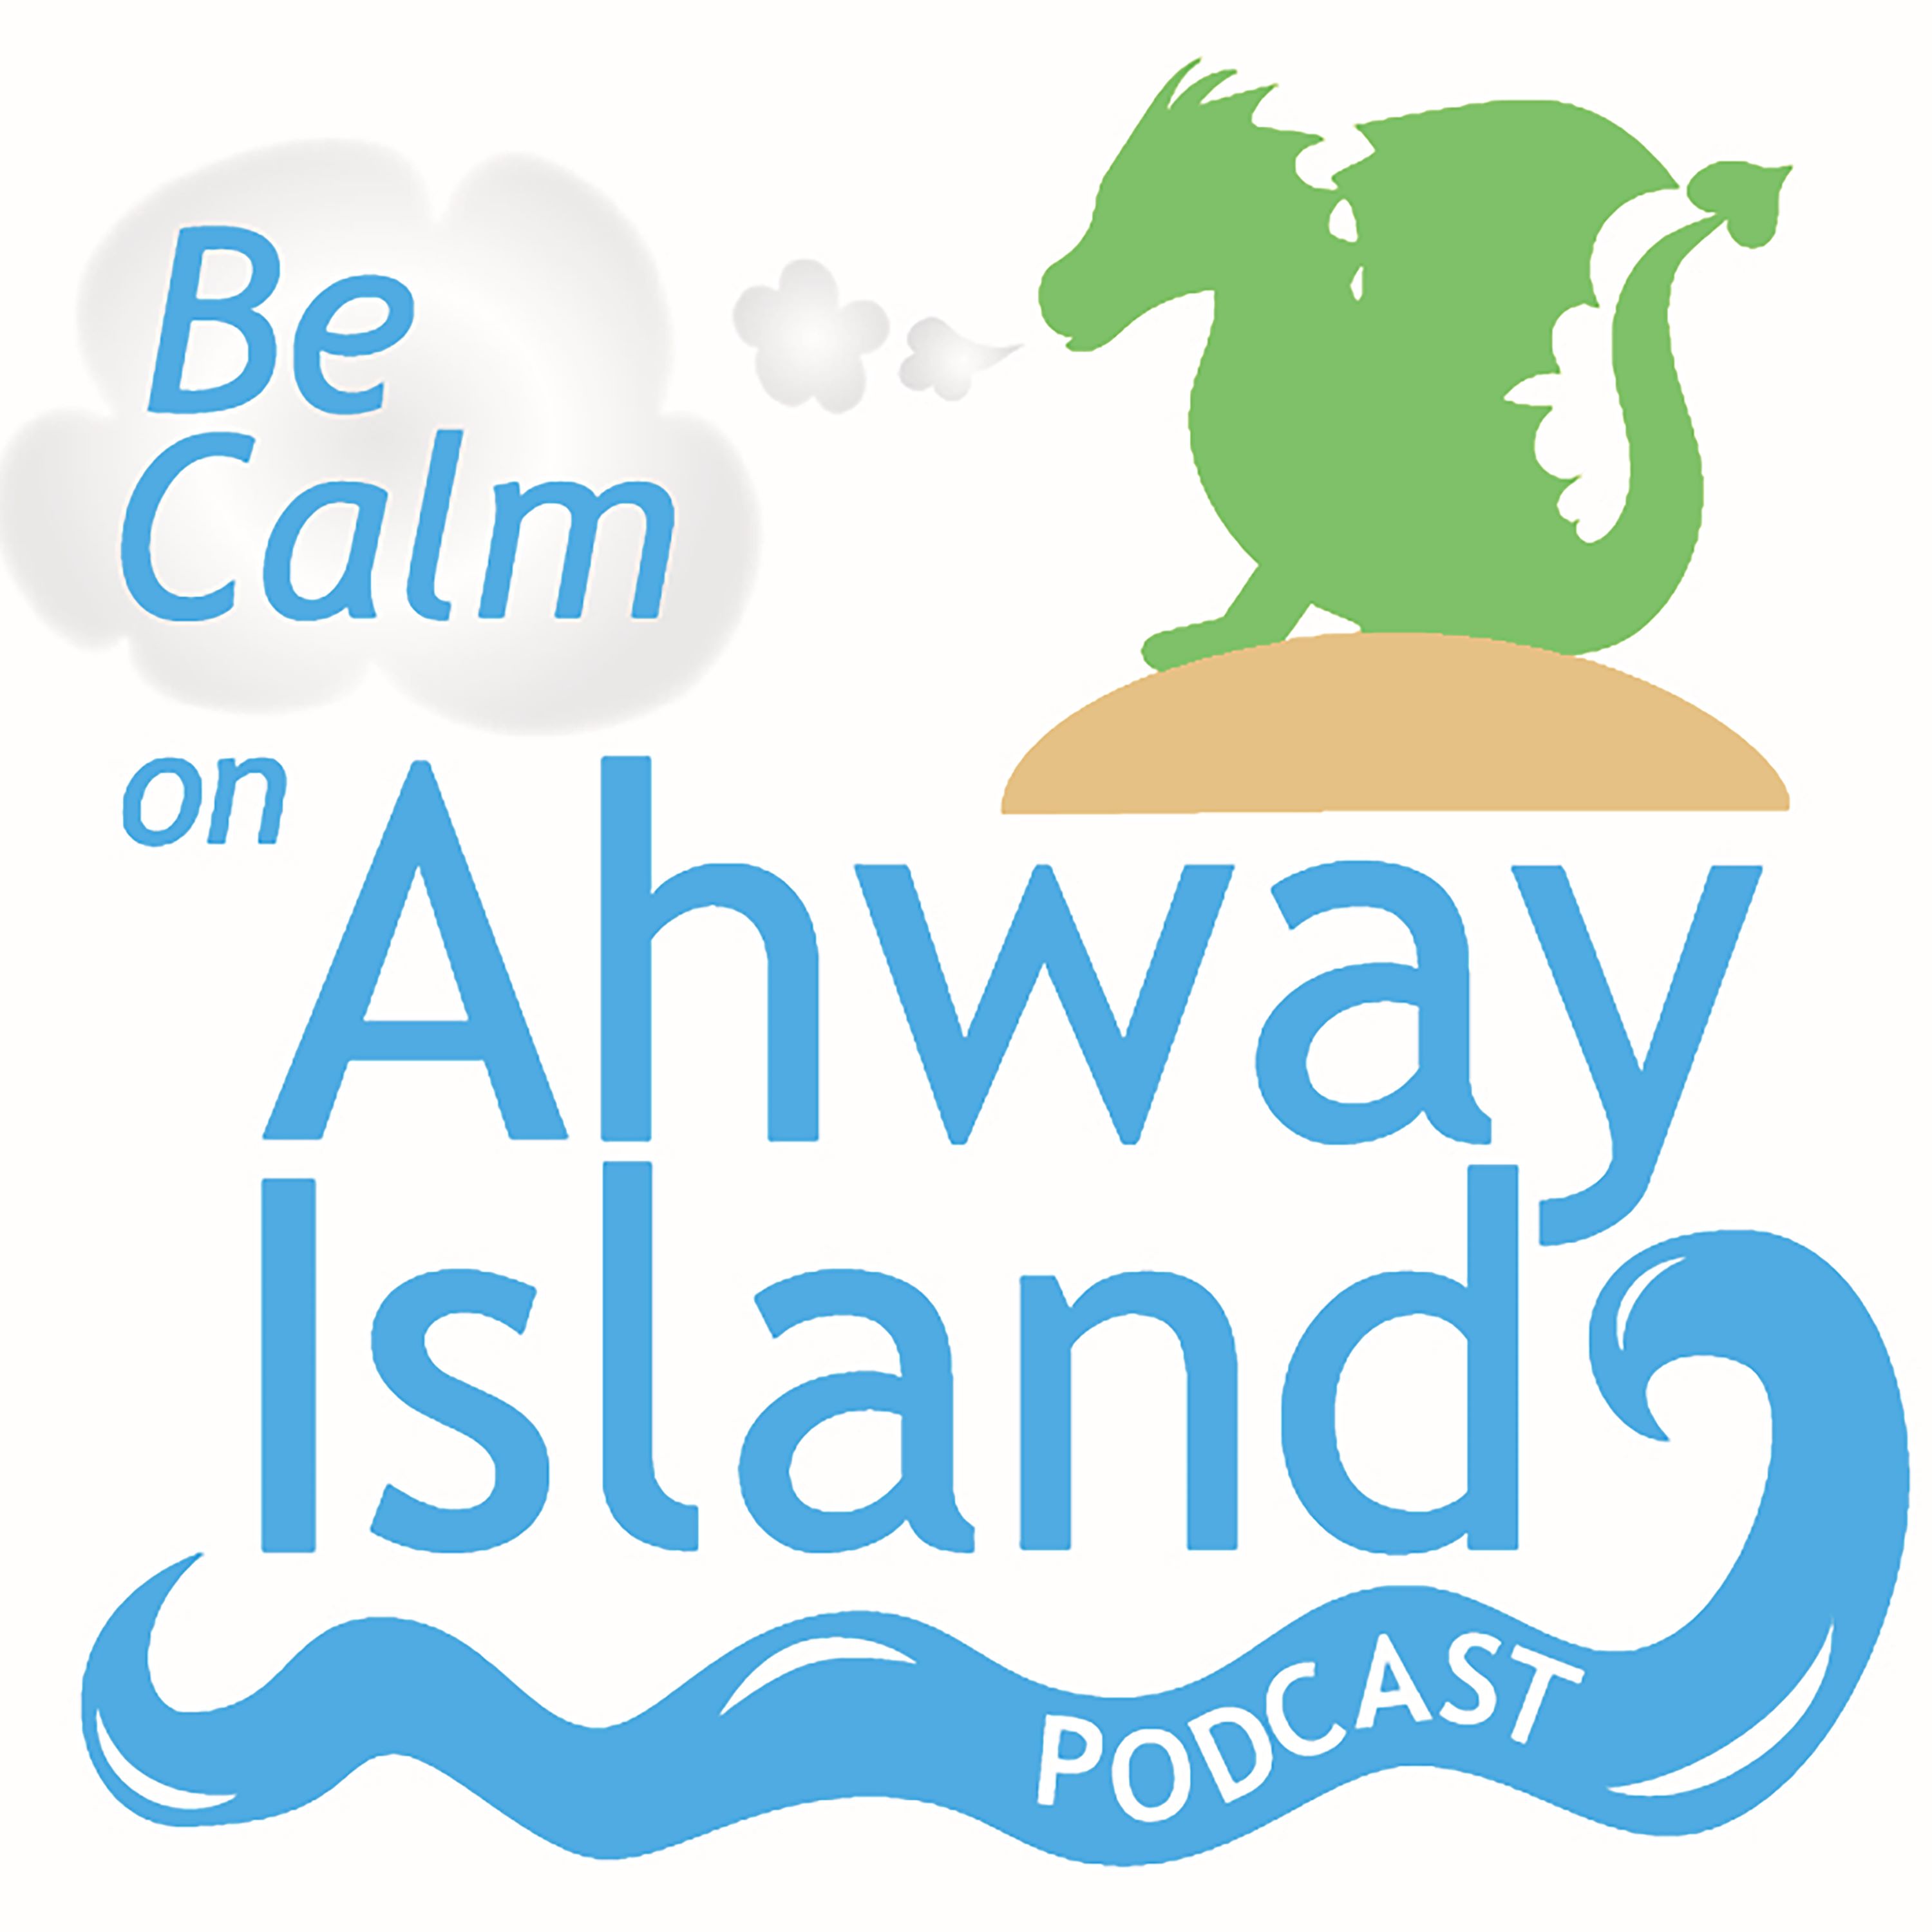 814. Ahway Arcade: a meditation and soothing child’s tale